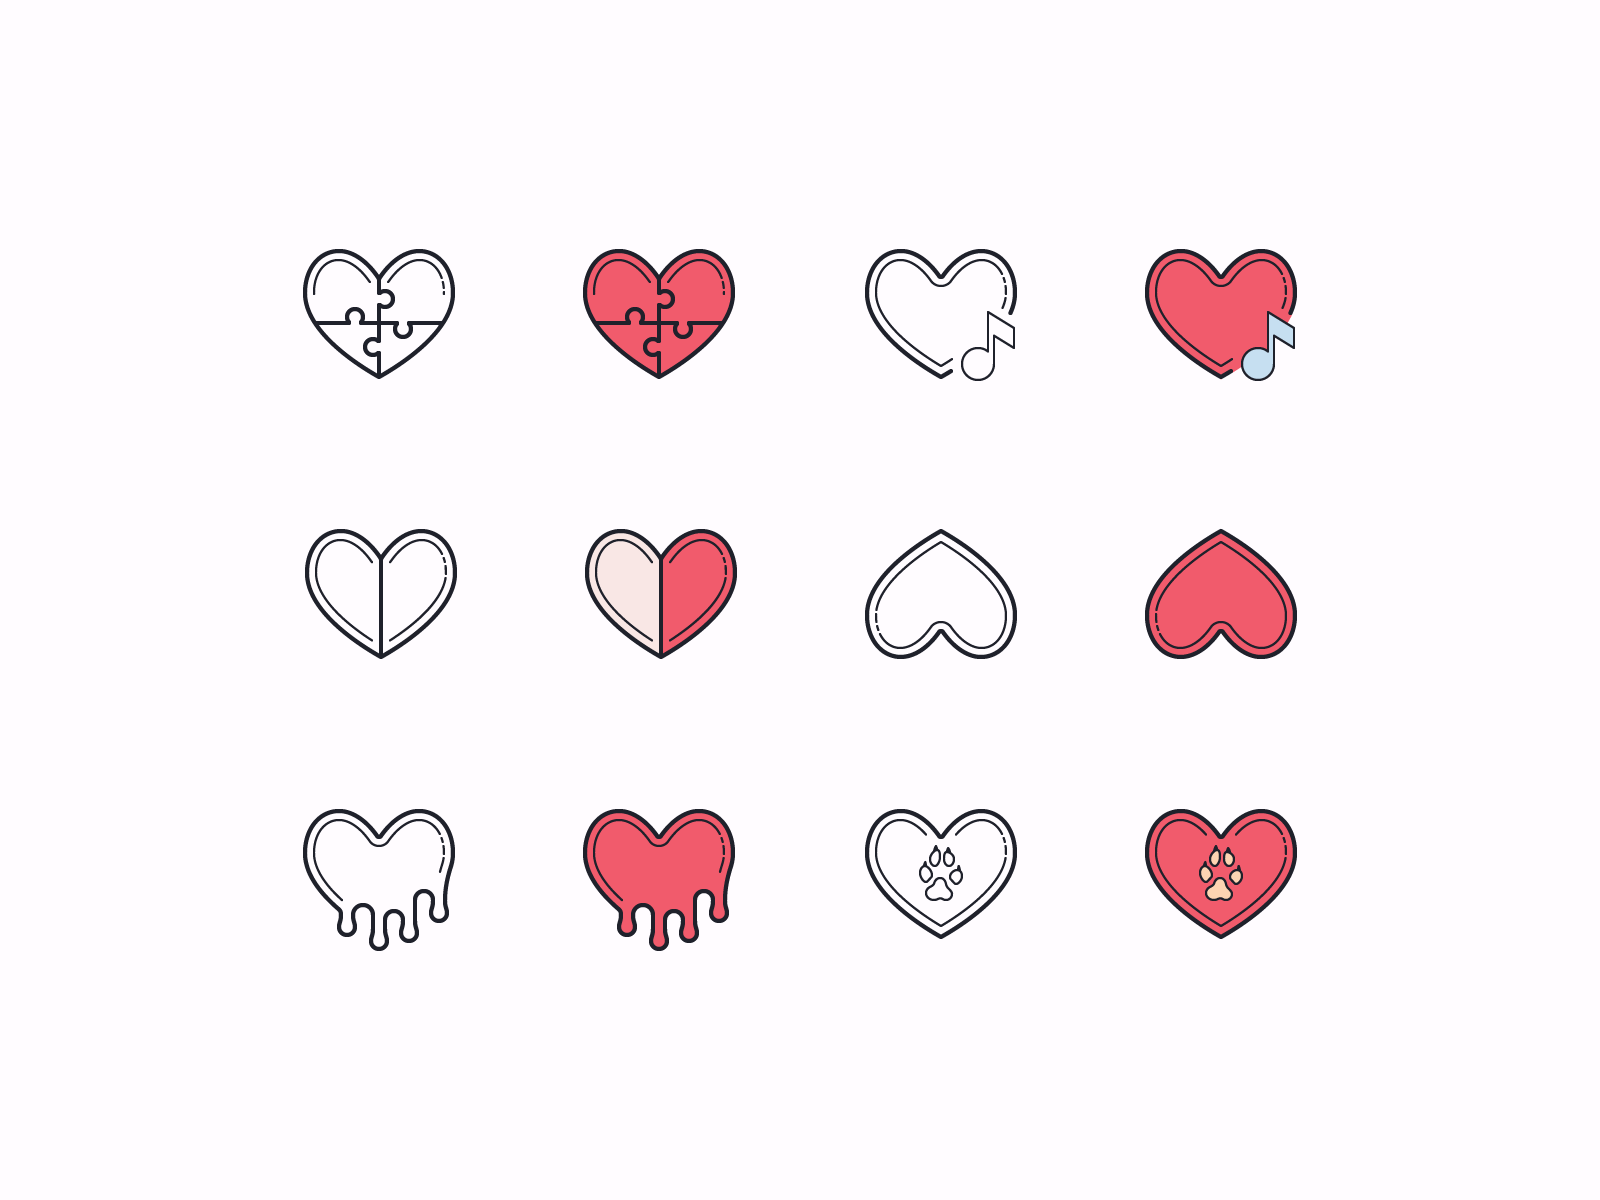 Hand Drawn icons: Hearts design digital art dog paw print graphic design heart hearts icon icon set icons icons8 like outline pets puzzle ui vector